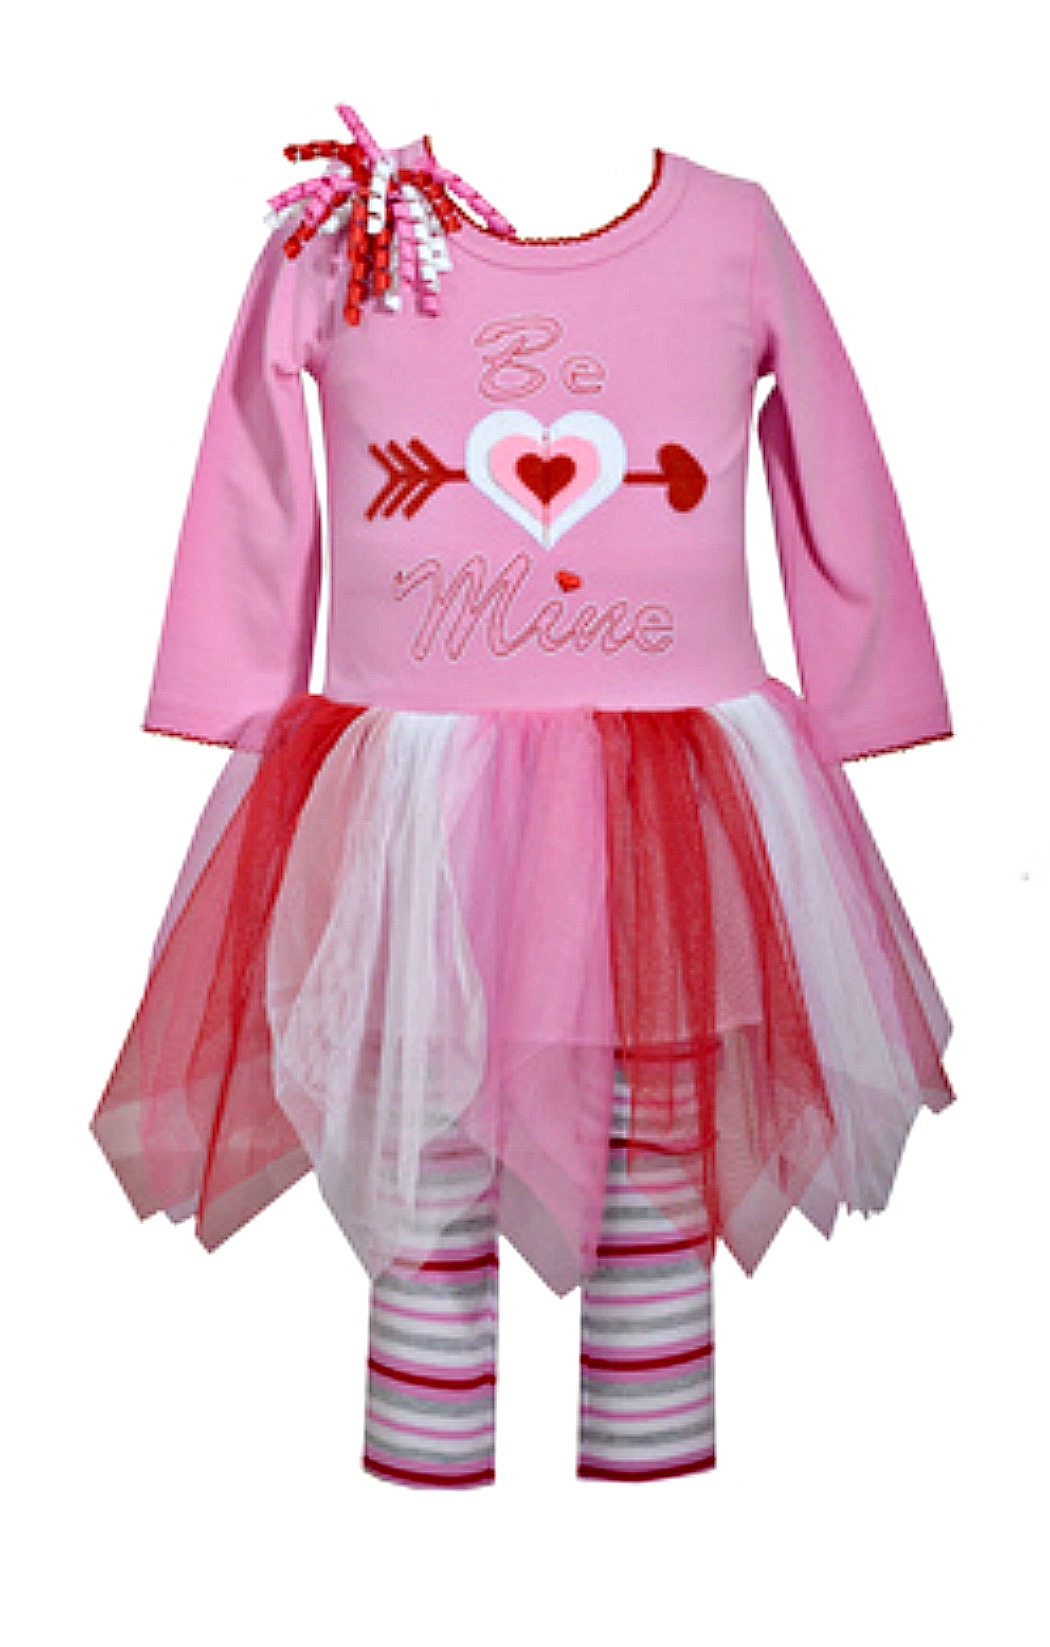 Adorable Girls Valentines Day Dresses - Fun & Unique Gift Ideas